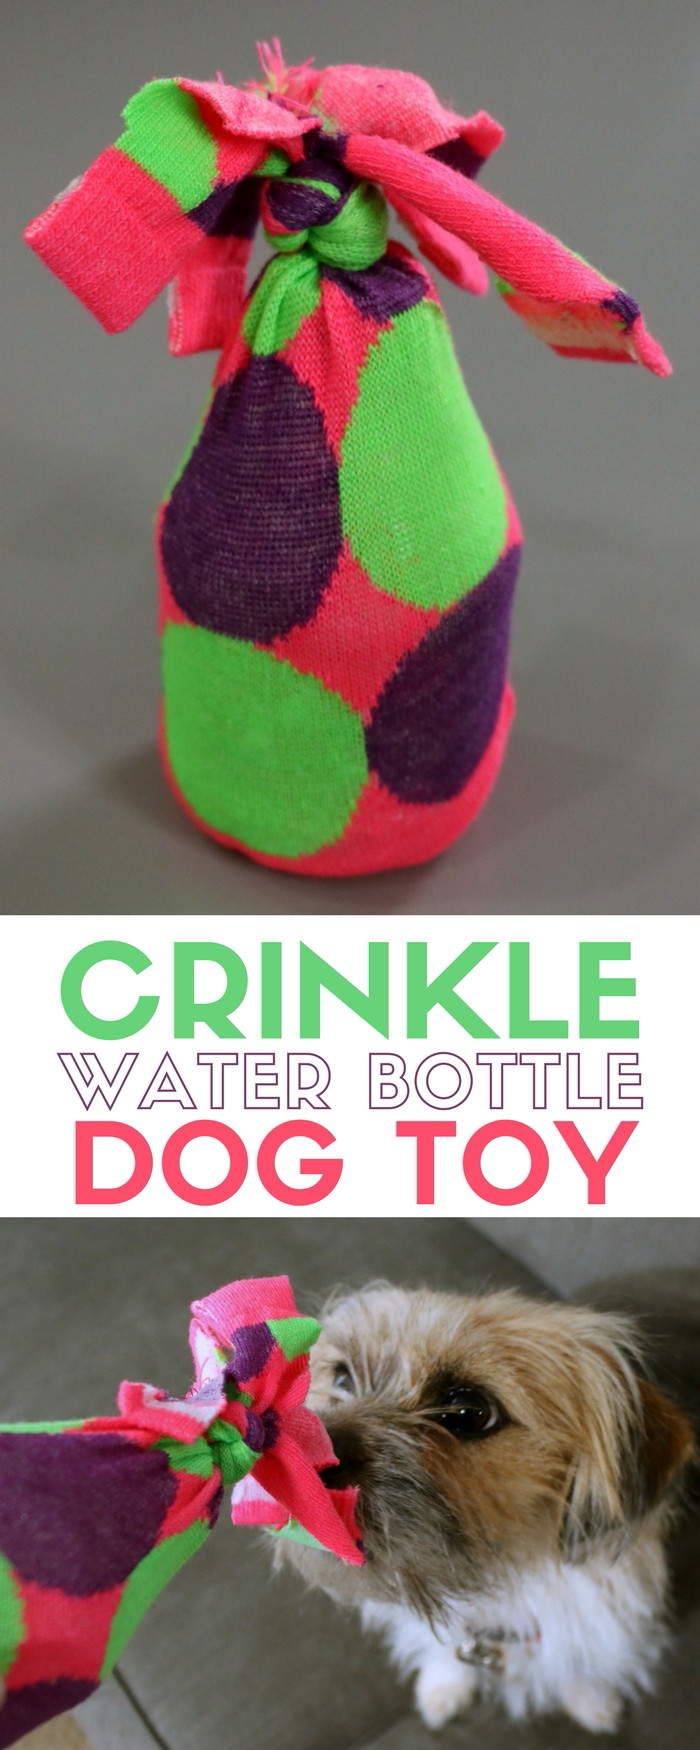 Water Bottle Dog Toy DIY
 How to Make a Water Bottle Crinkle Dog Toy The Crafty